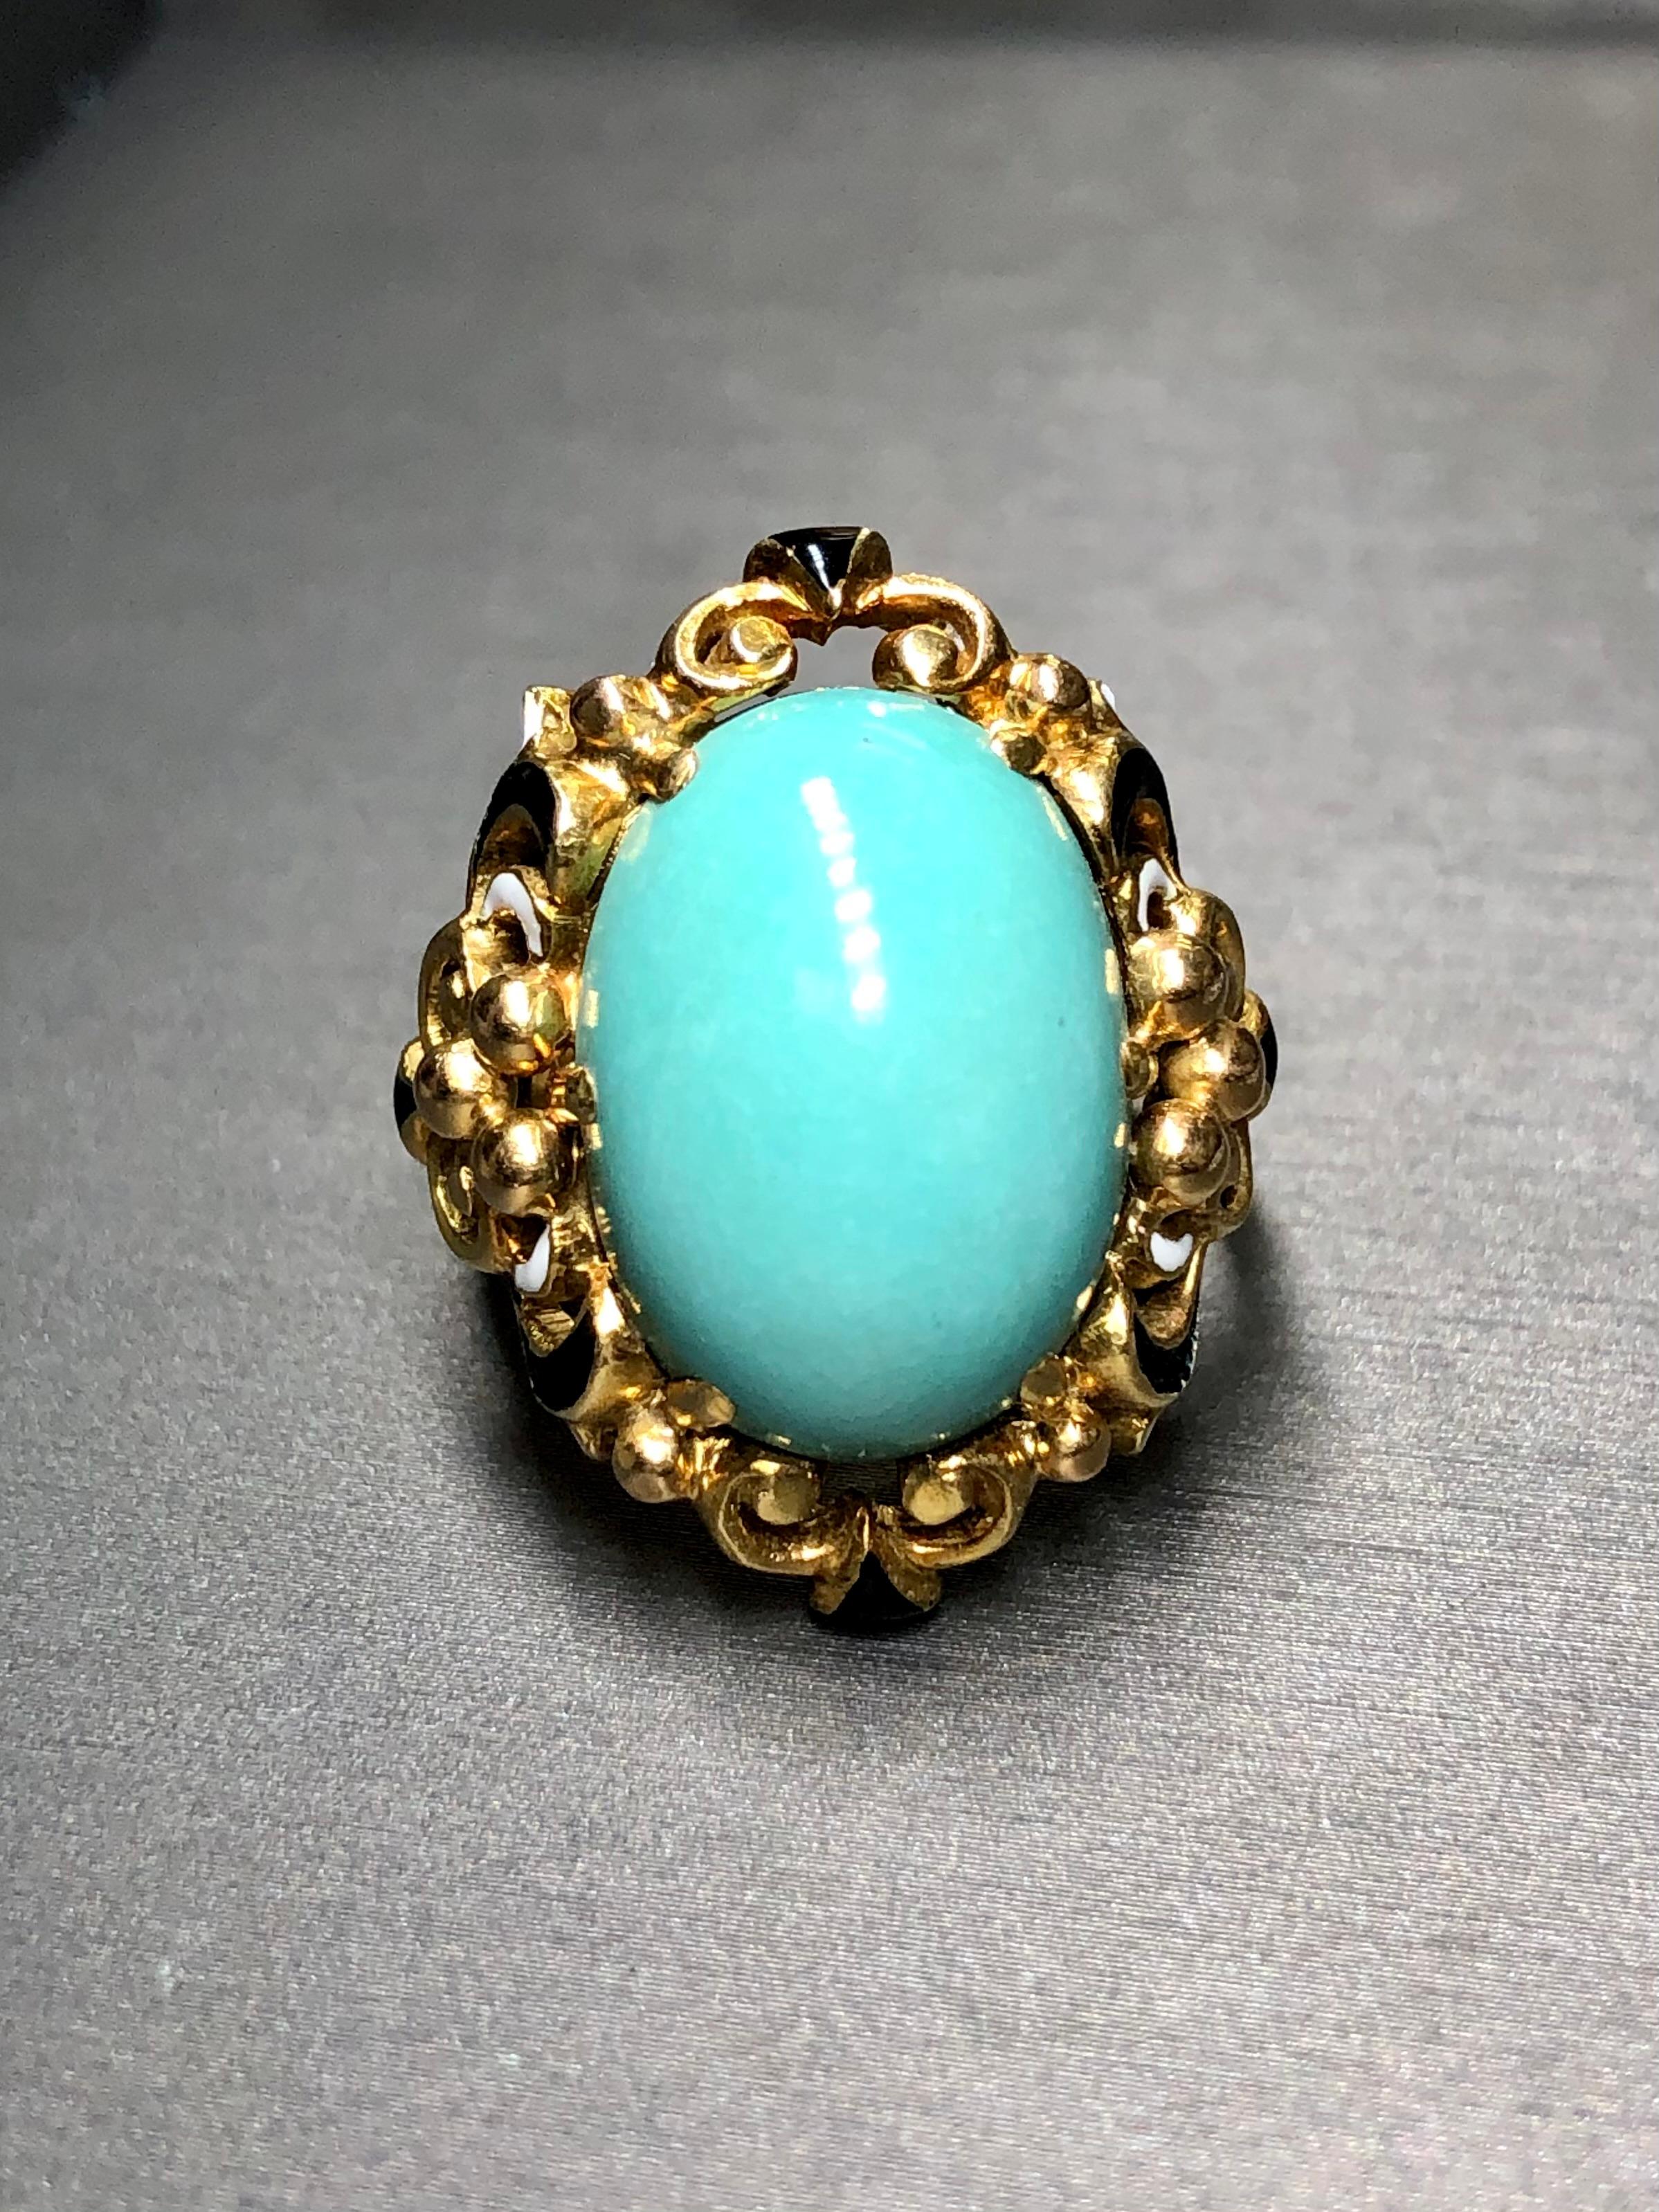 
A beautiful cocktail ring c. the 1950’s done in 18K yellow gold and finished with intricately laid black and white enamel and centered by cabochon natural turquoise (18.15mm x 13mm x 8.16mm. A clean design and all